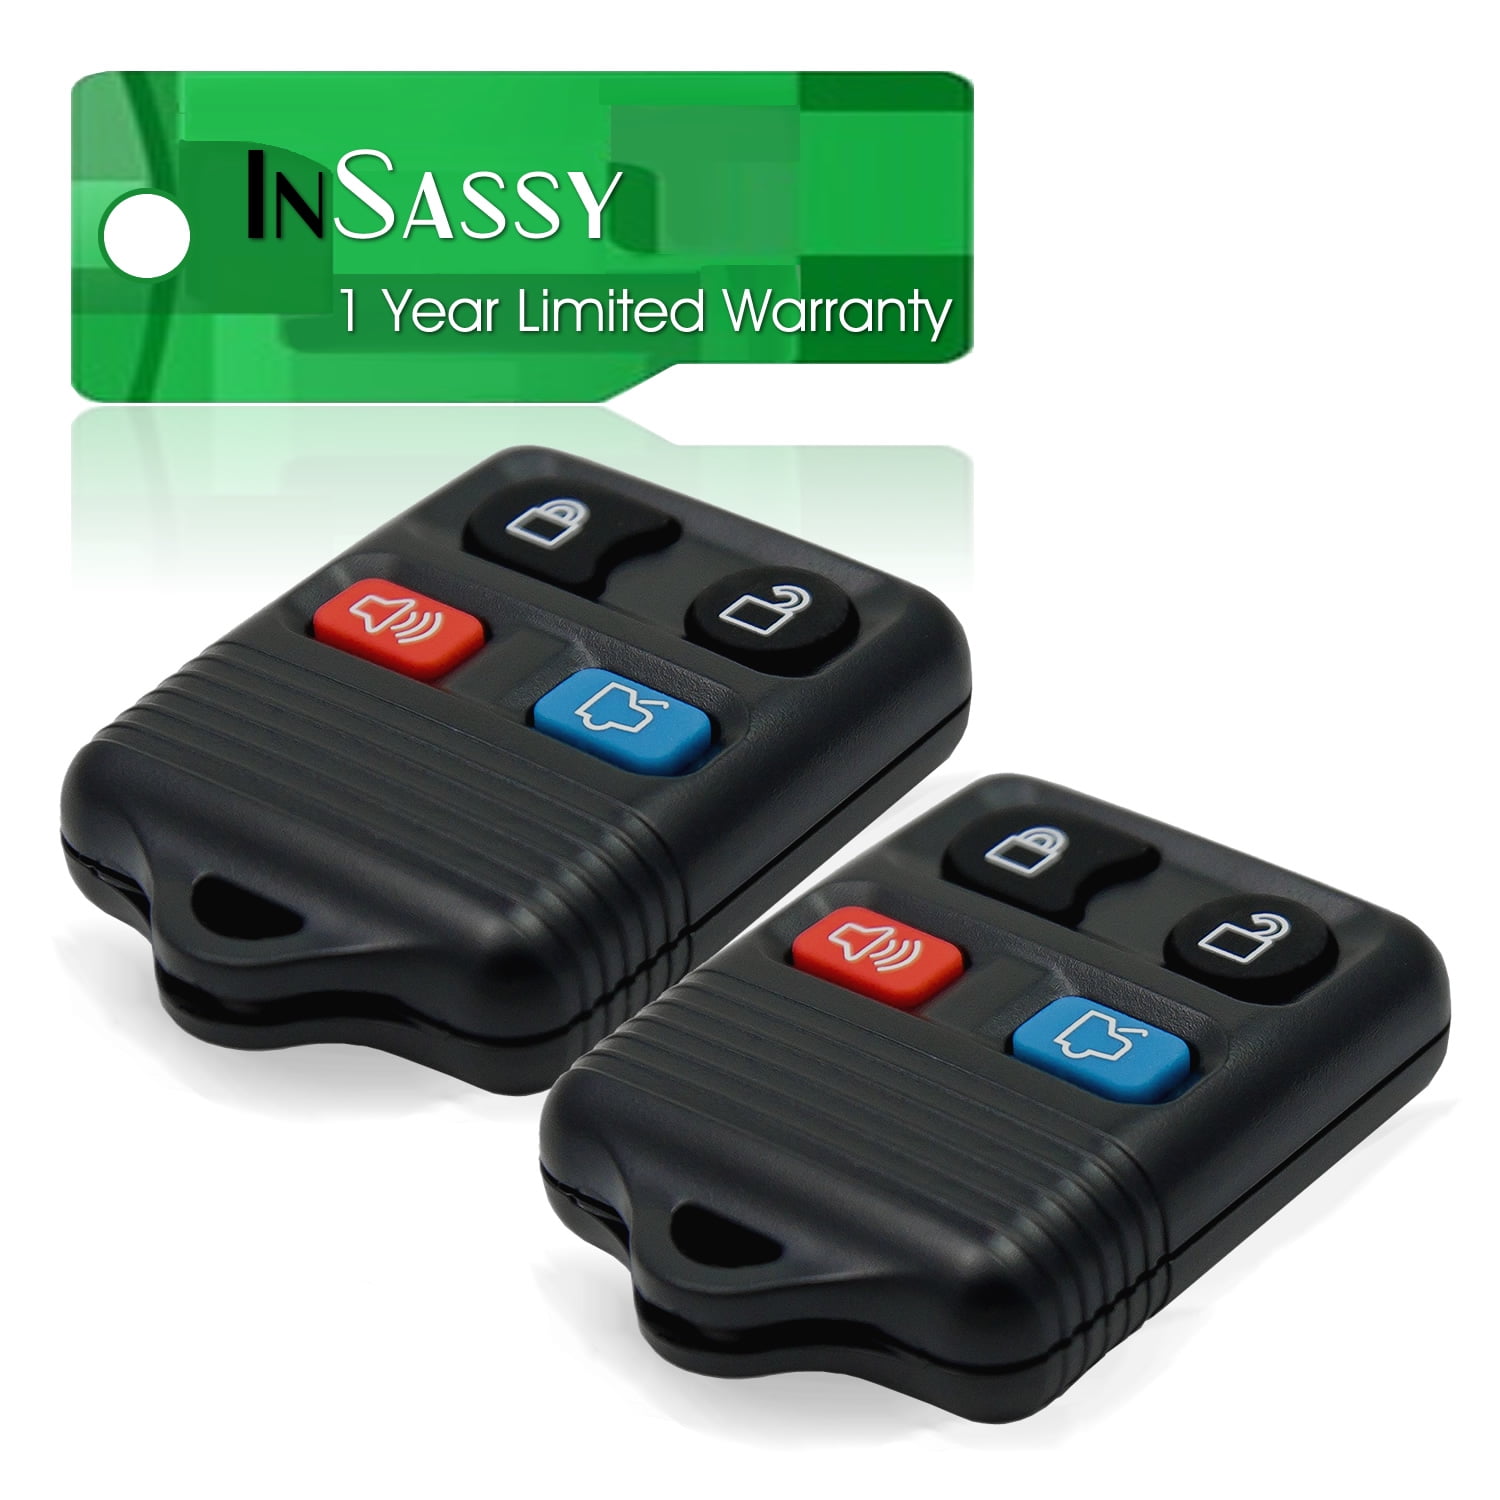 2 Replacement Keyless Entry Remote Key Fob Clicker Transmitter Control For Ford 